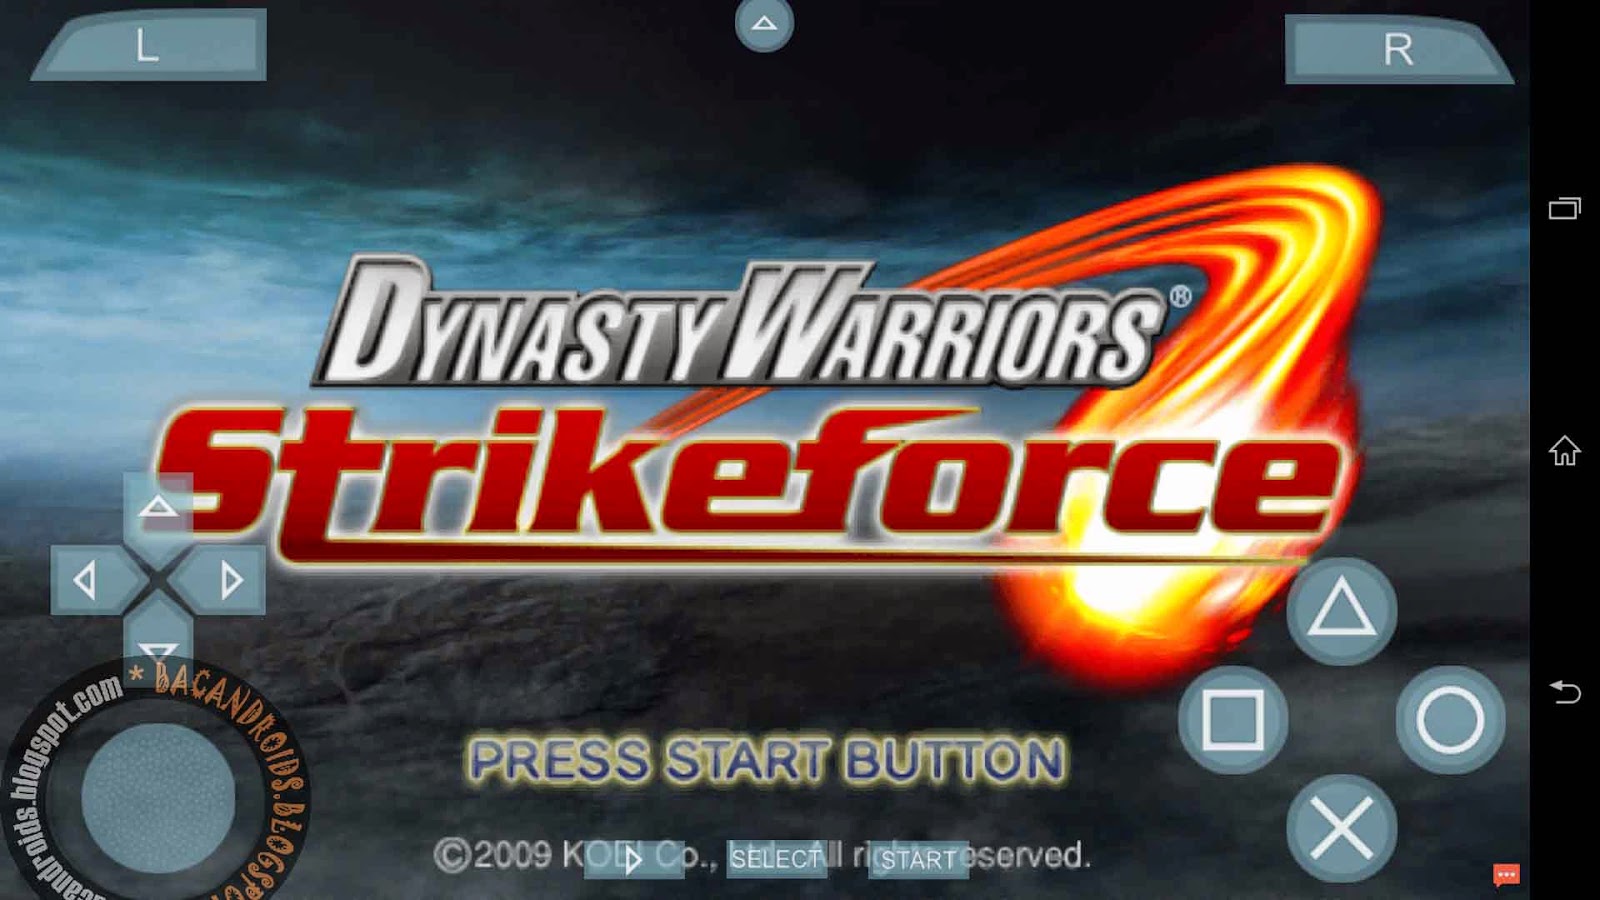 Download iso games for psp